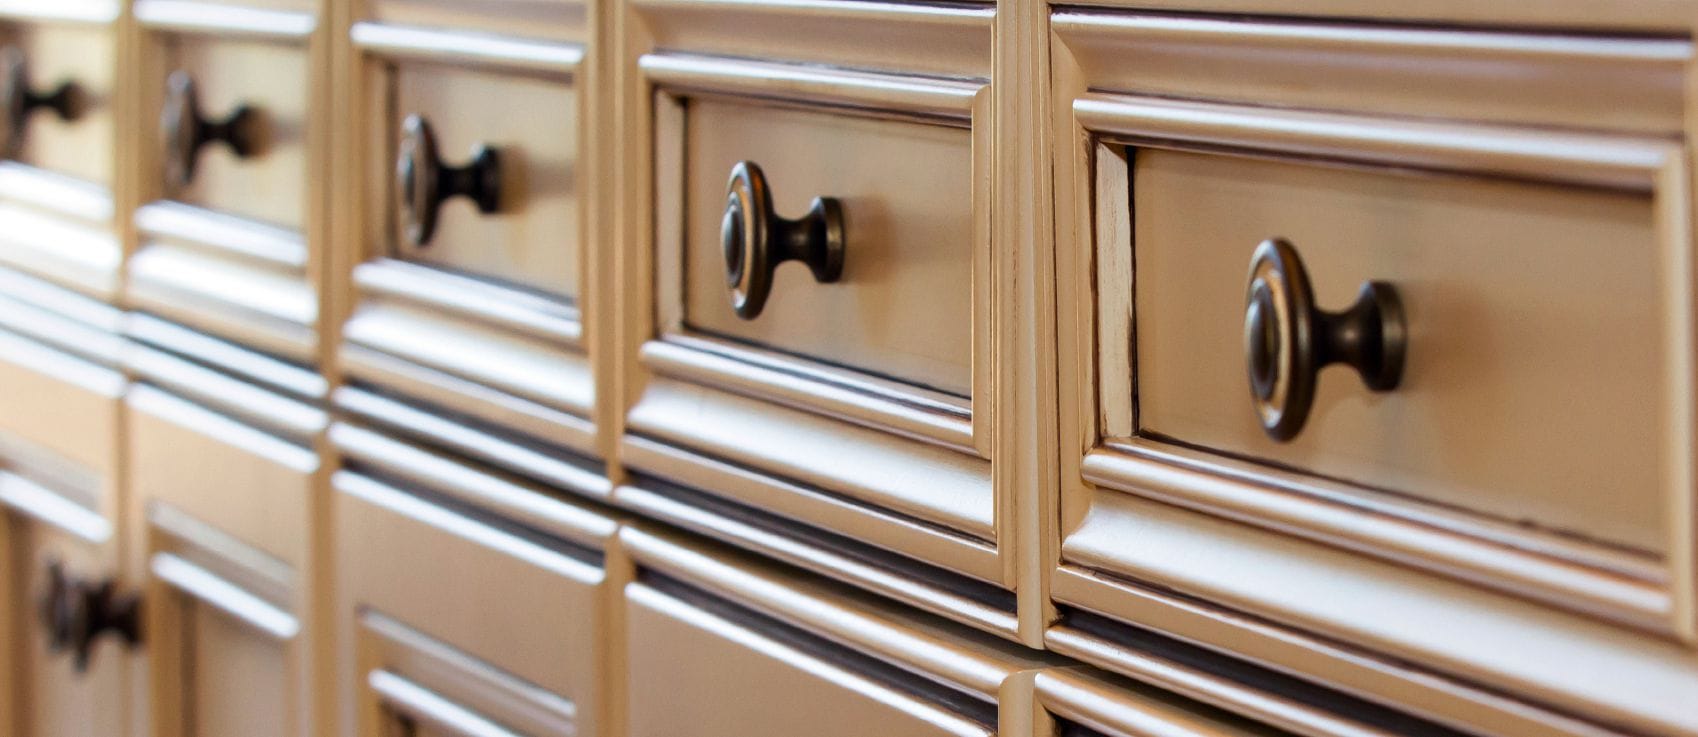 Kitchen Cabinet Knobs Pulls And Handles, Kitchen Cabinets With Pulls And Knobs